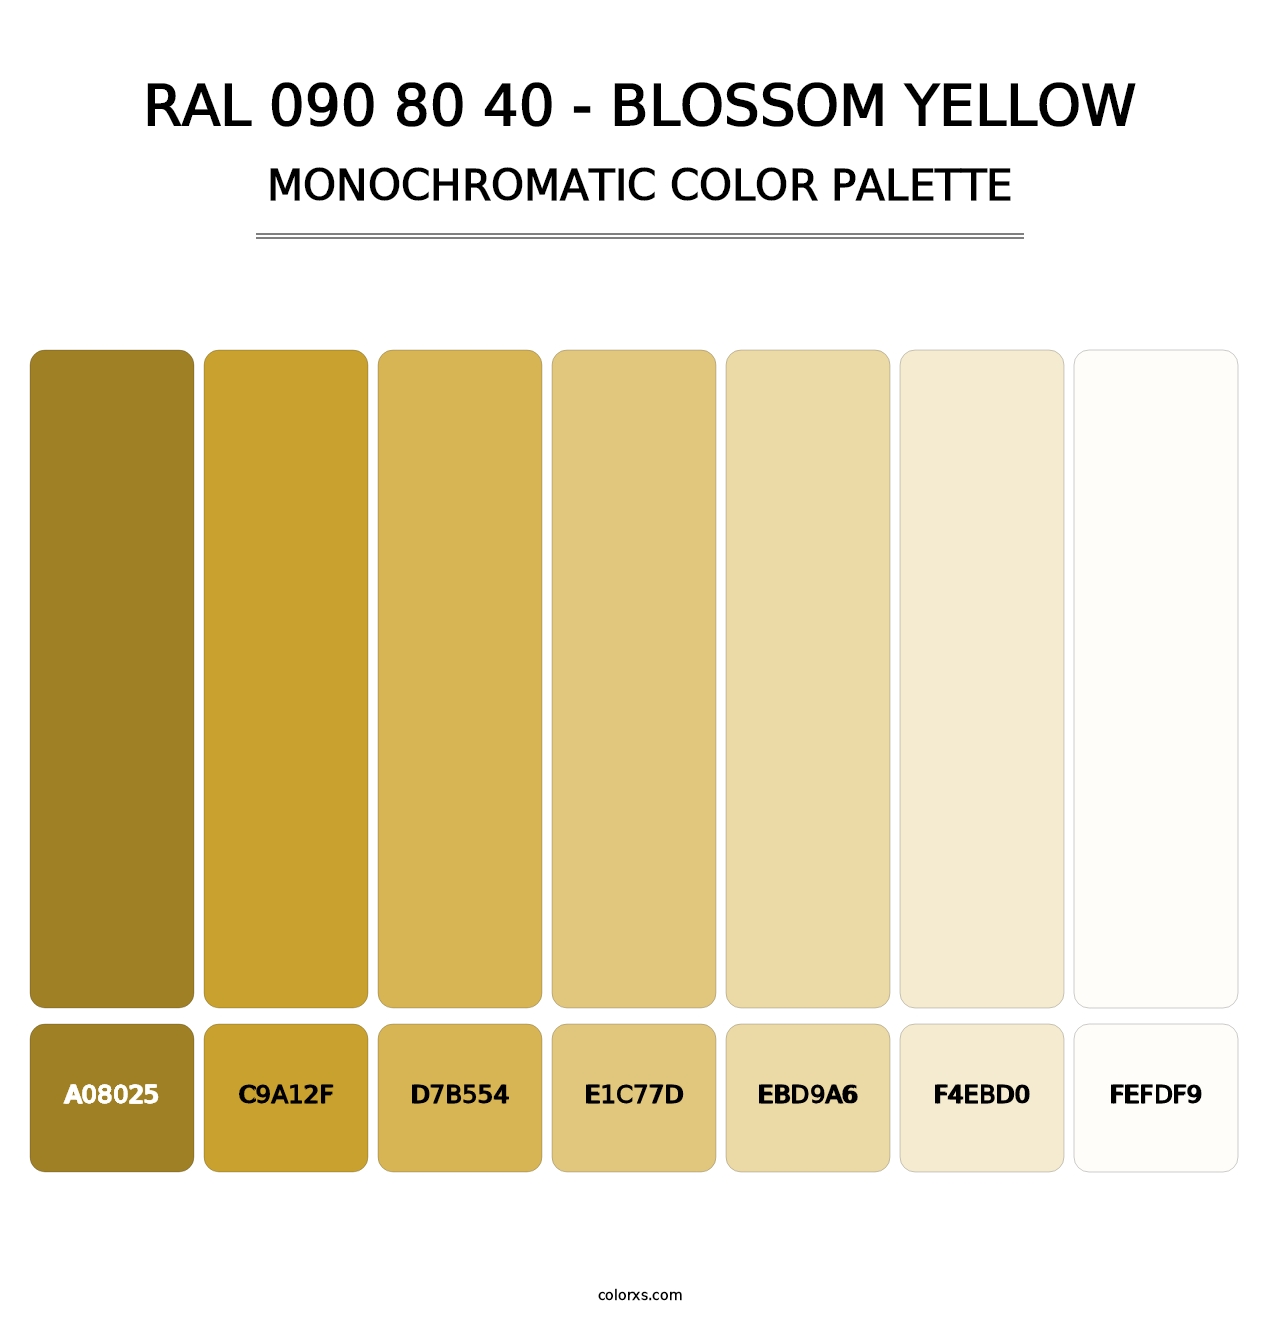 RAL 090 80 40 - Blossom Yellow - Monochromatic Color Palette